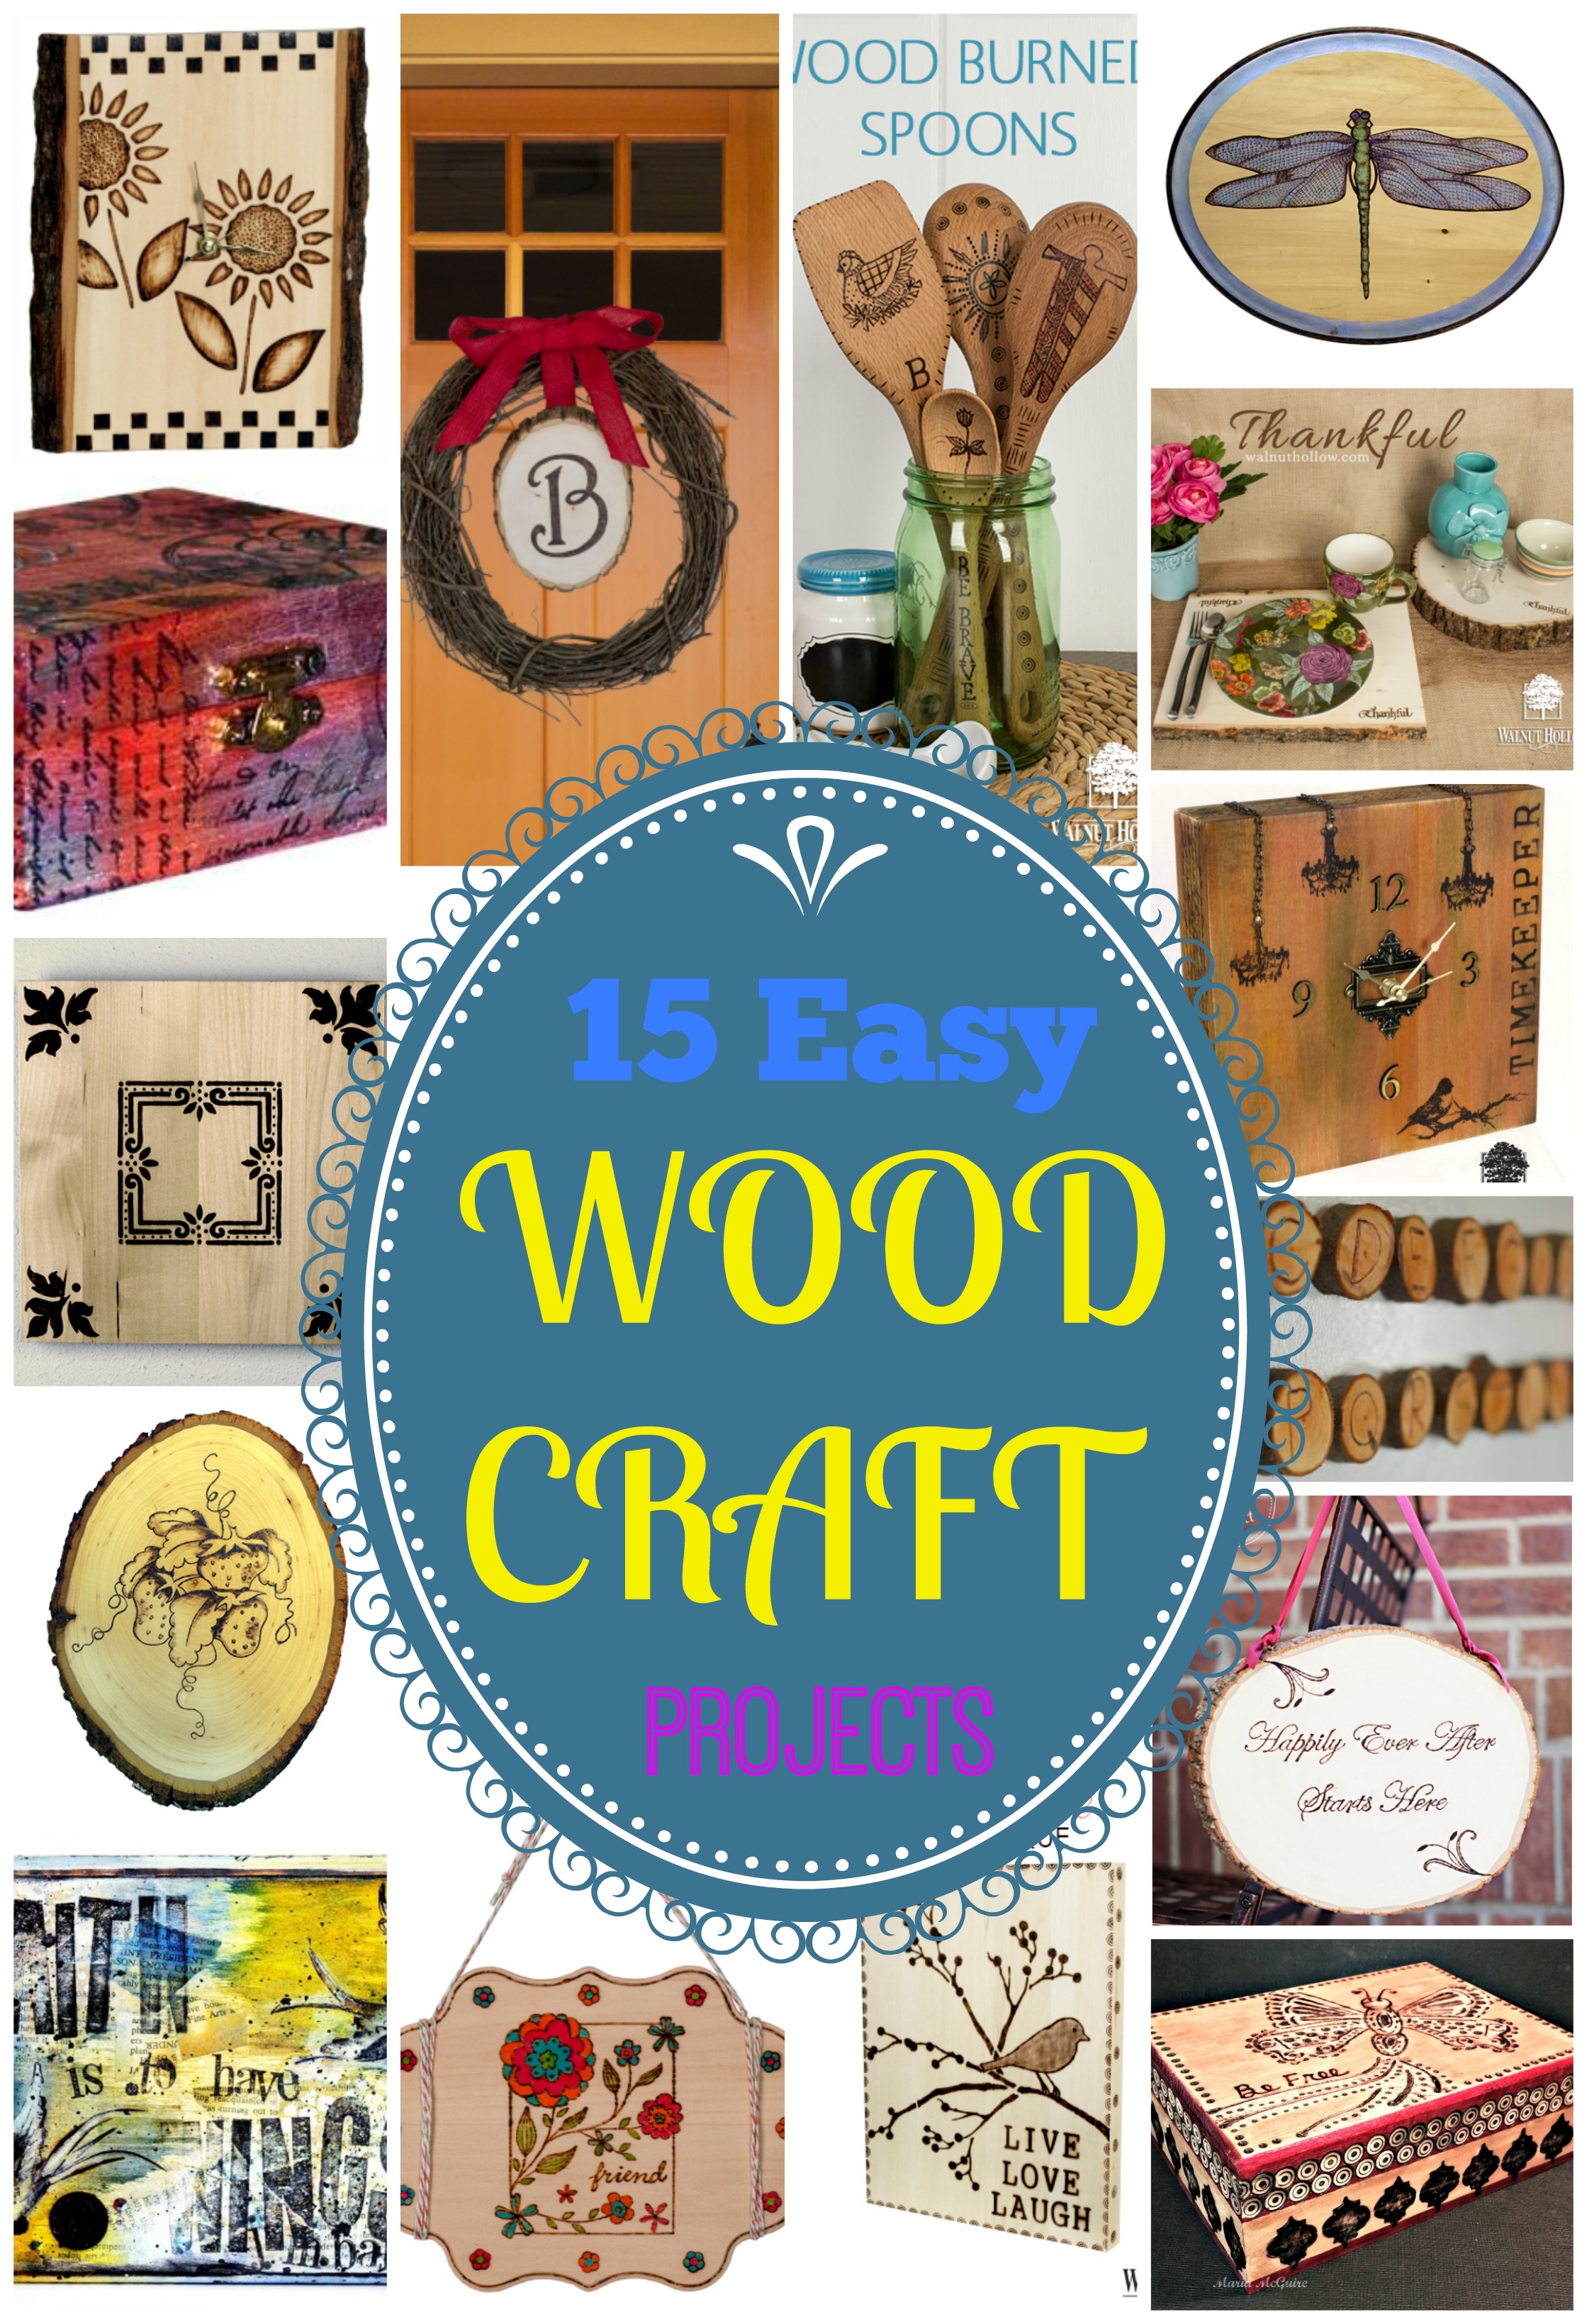 30 Wood Craft Ideas That Will Blow You Away - Craftsy Hacks